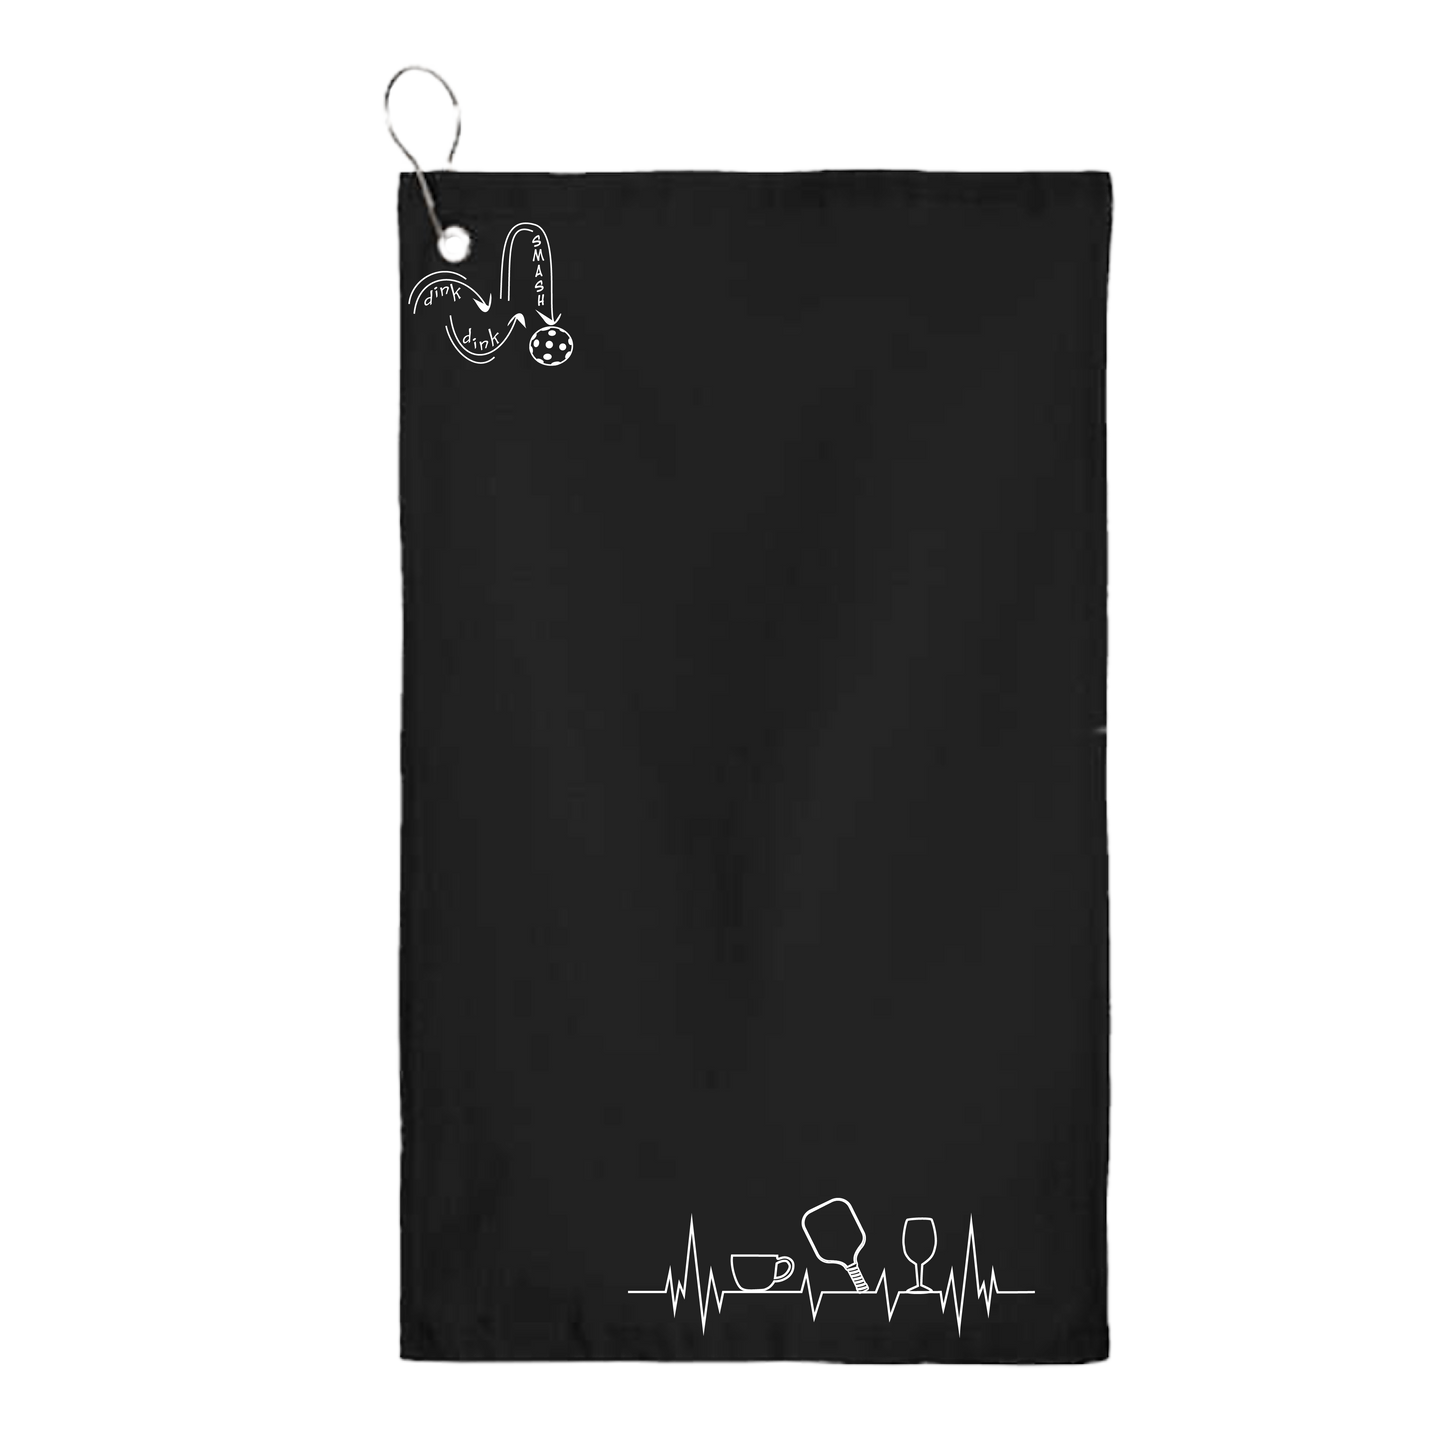 Coffee, Pickleball, Wine EKG Heartbeat | Pickleball Court Towels | Grommeted 100% Cotton Terry Velour